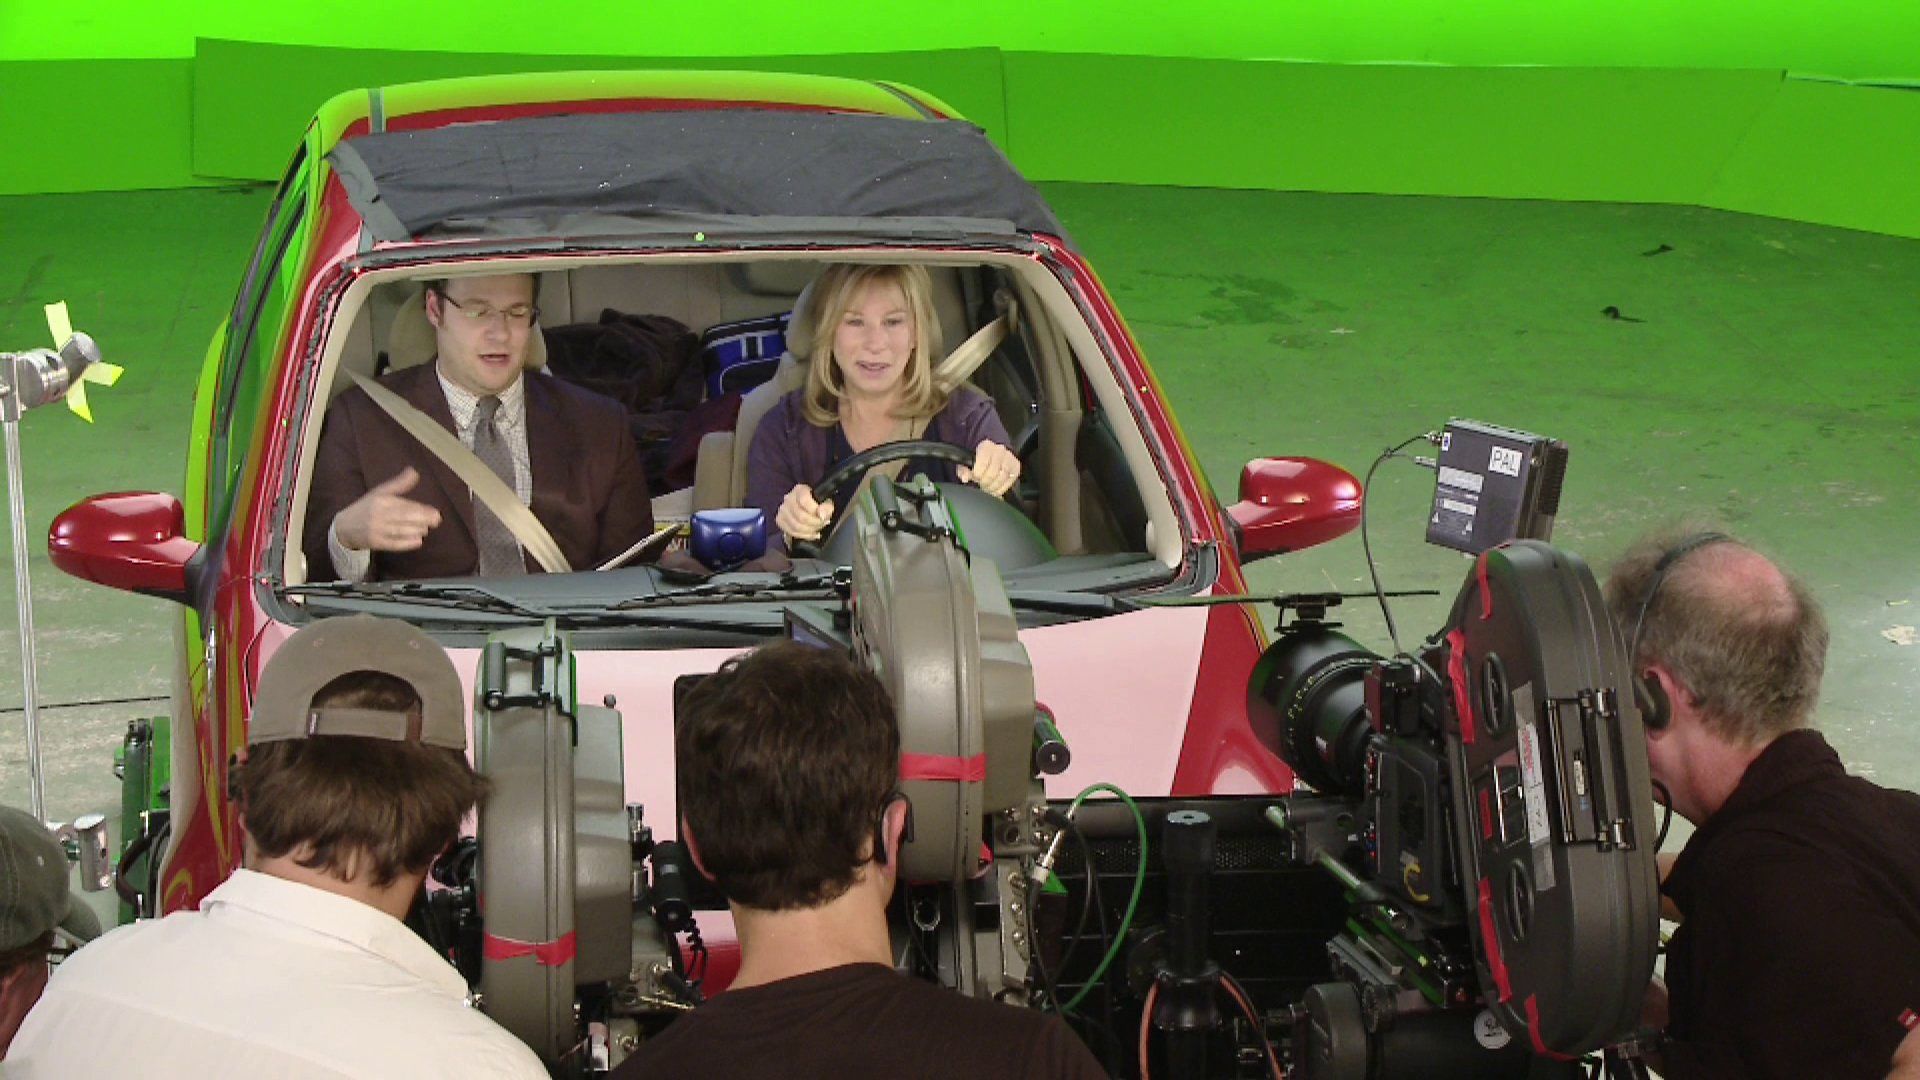 Rogen and Streisand are filmed in a car against a green screen.